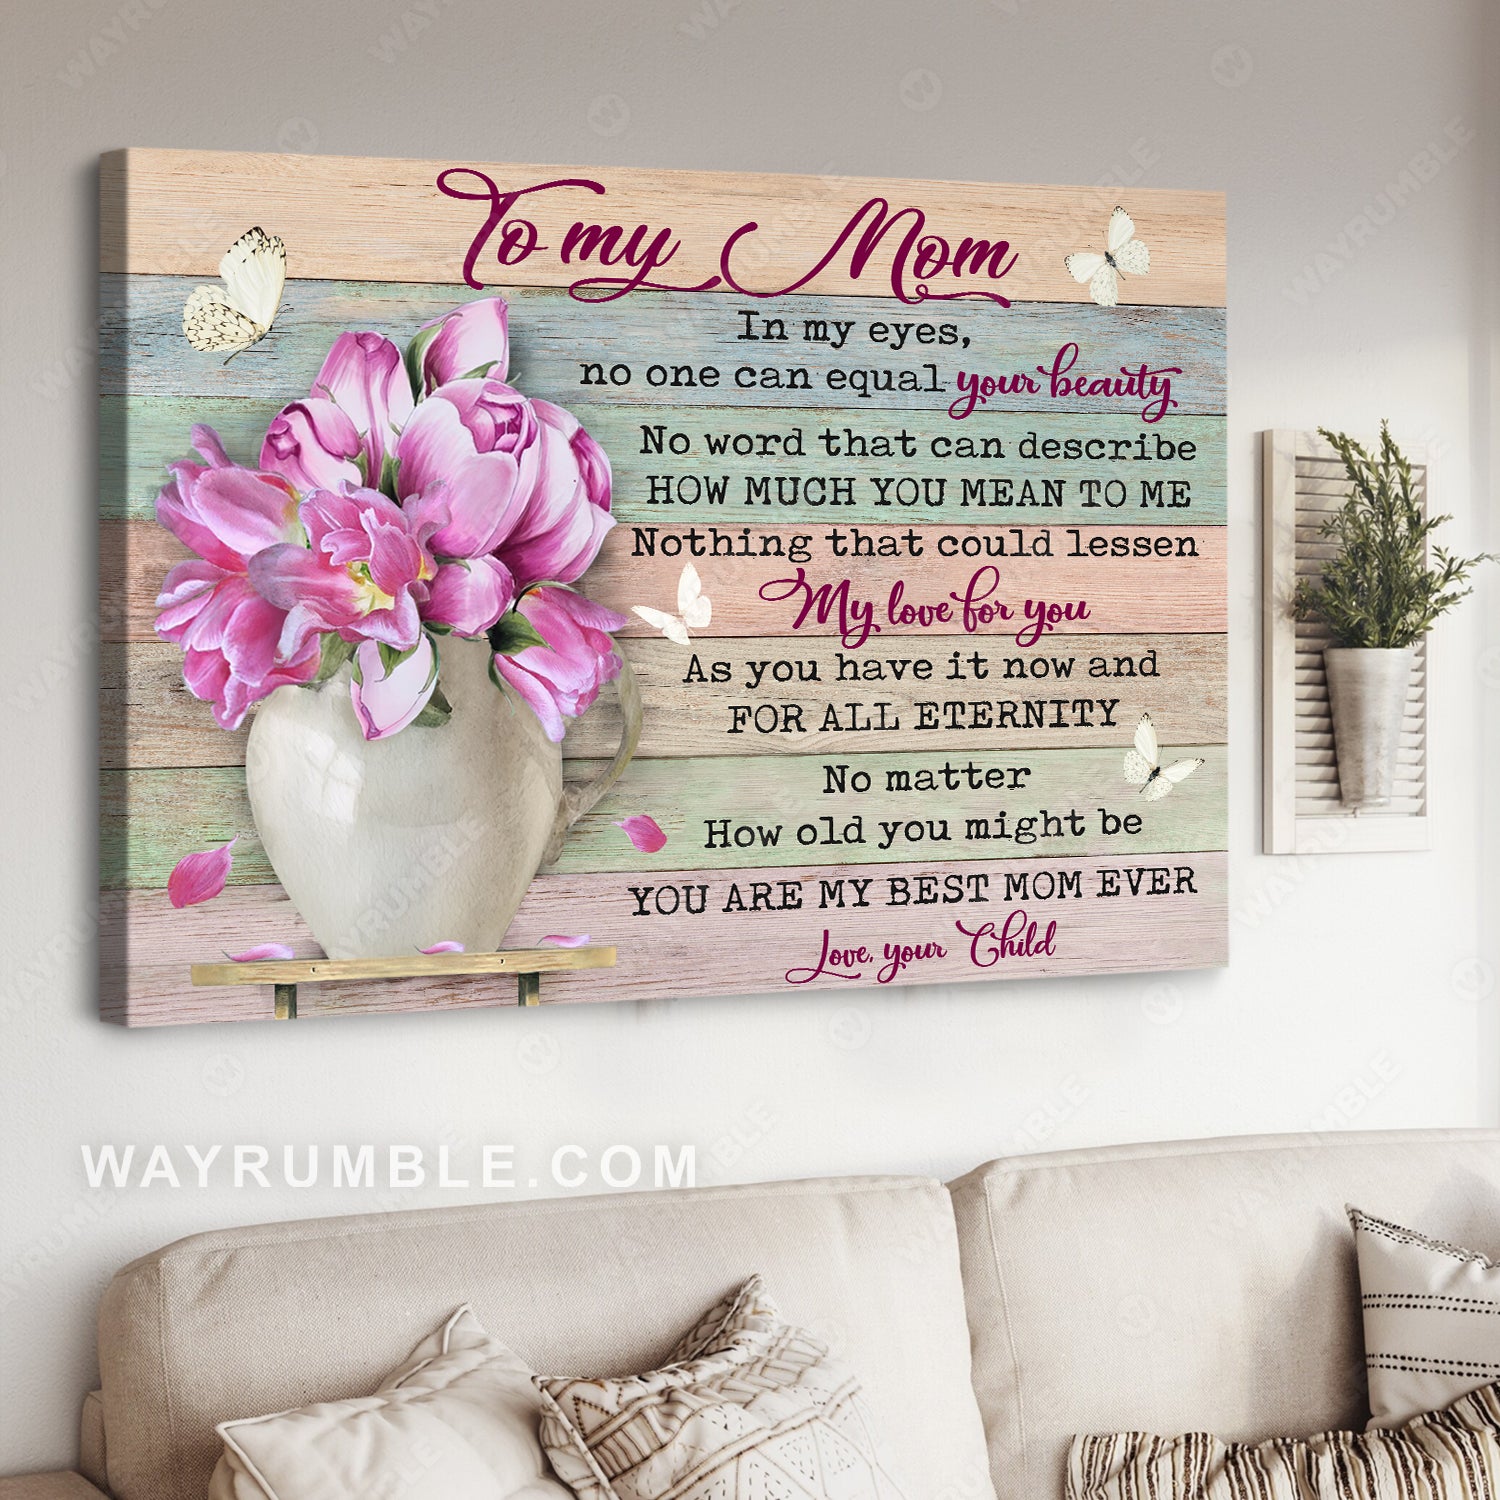 Daughter to mom, Pink flower vase, Still life painting, You are my best mom ever - Family Landscape Canvas Prints, Wall Art